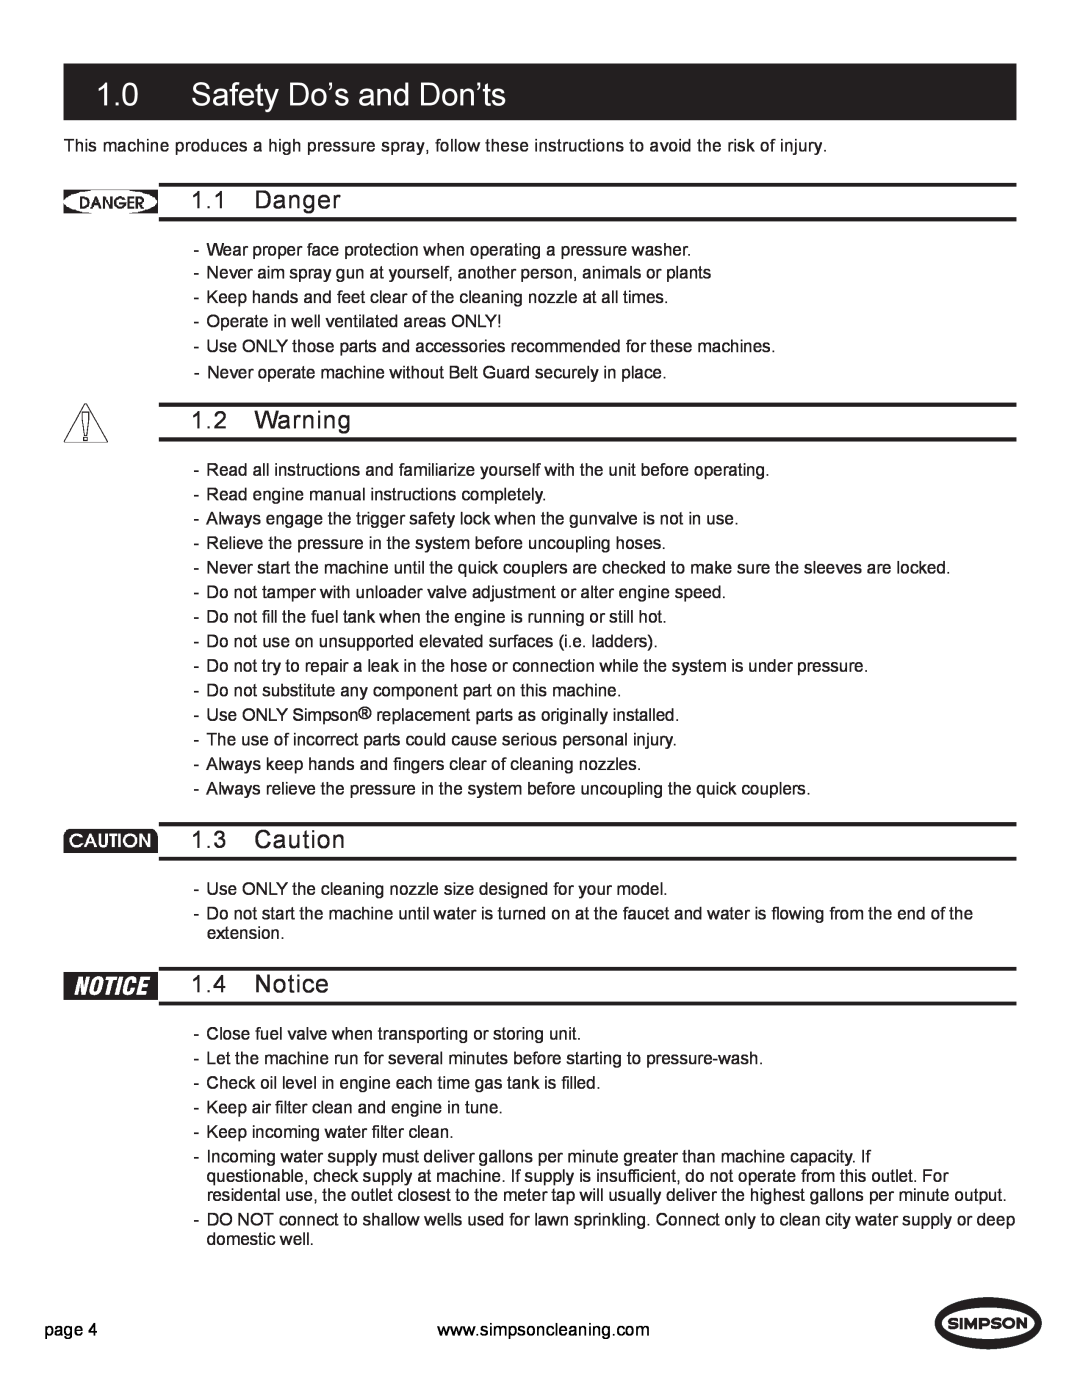 Simpson PS3000 manual 1.0Safety Do’s and Don’ts, Danger 